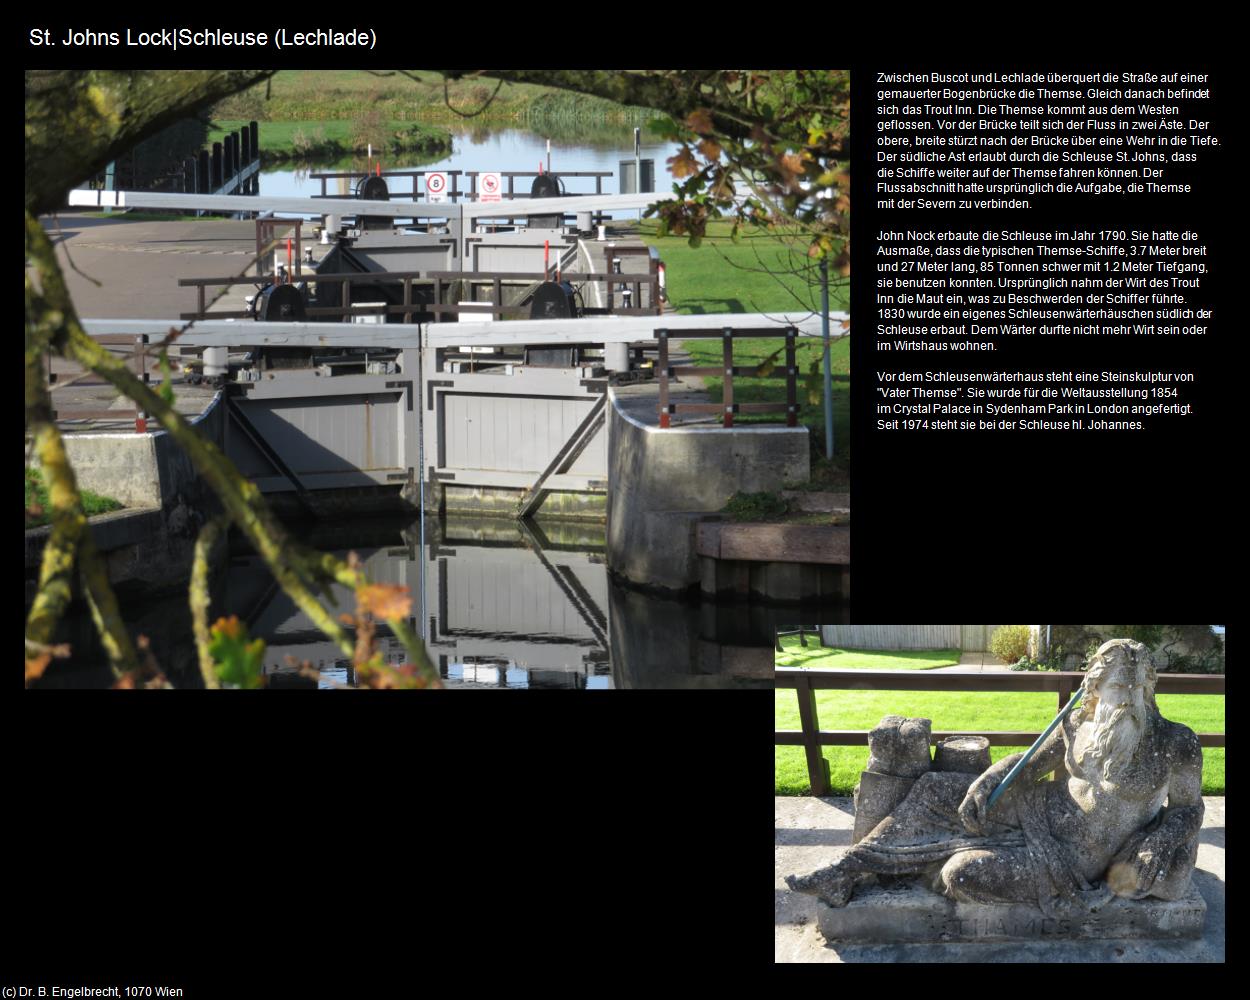 St. Johns Lock|Schleuse  (Lechlade, England) in Kulturatlas-ENGLAND und WALES